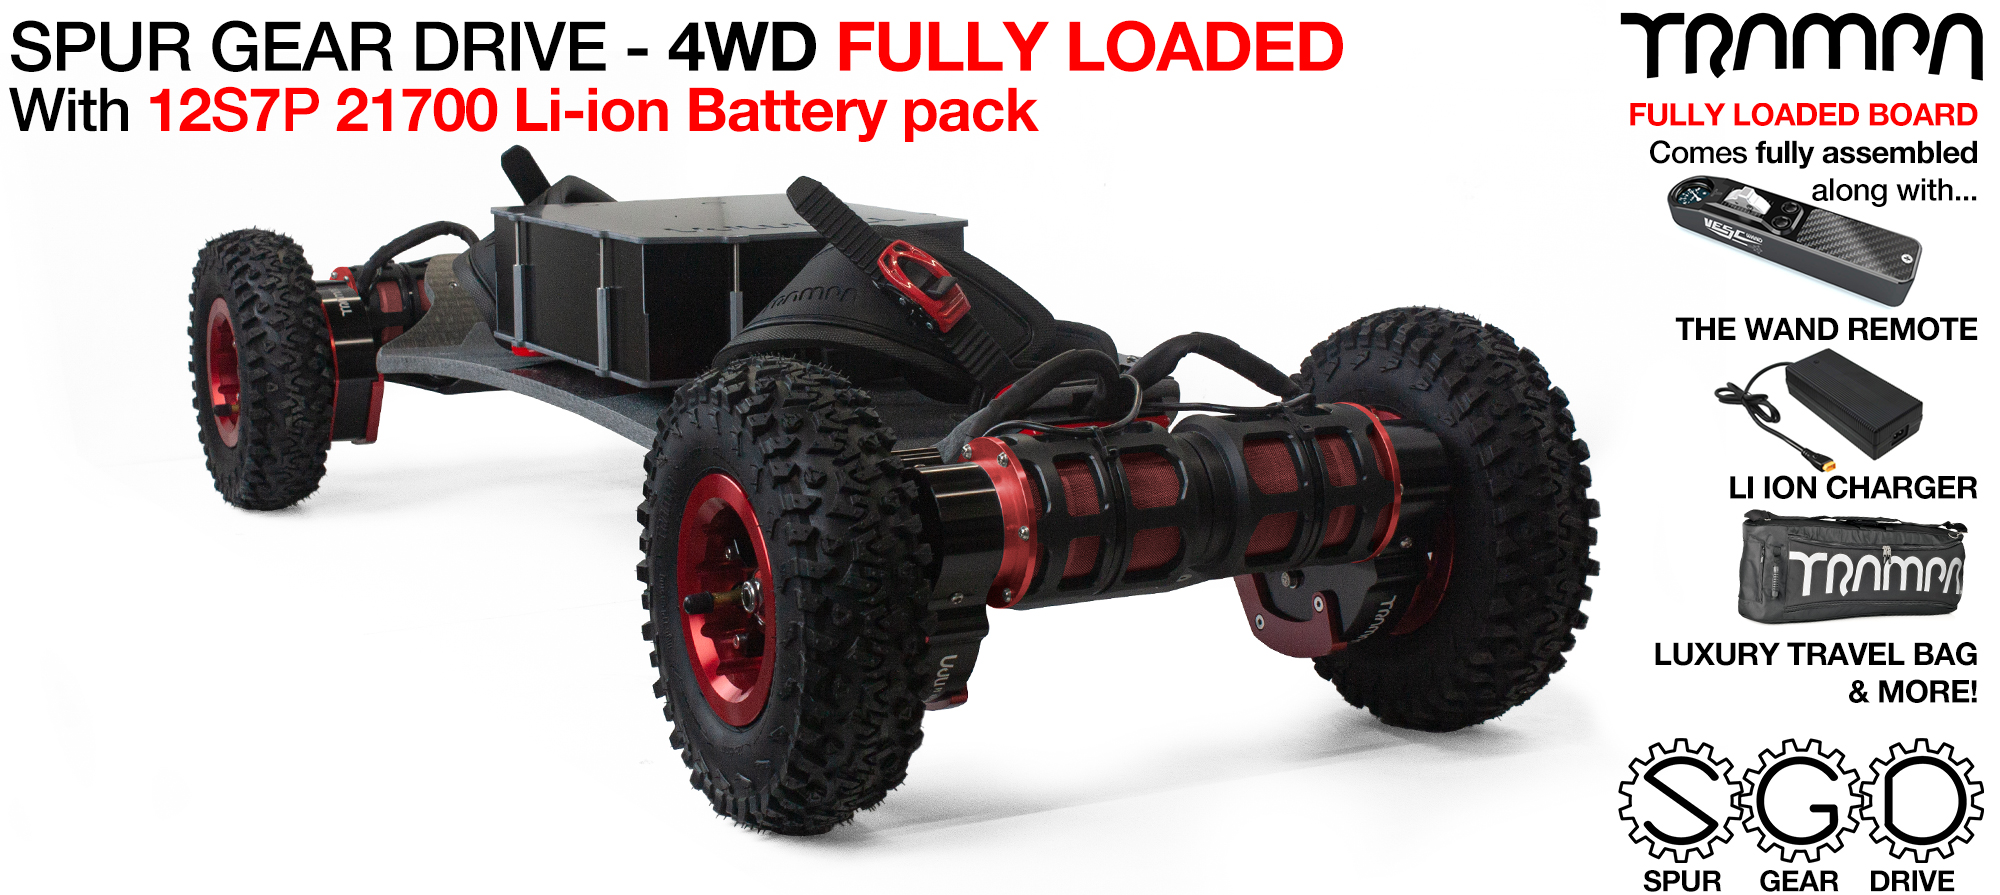 4WD SGD BIGBOI 2x HD-60T 21700 Battery pack - LOADED  (out of stock)